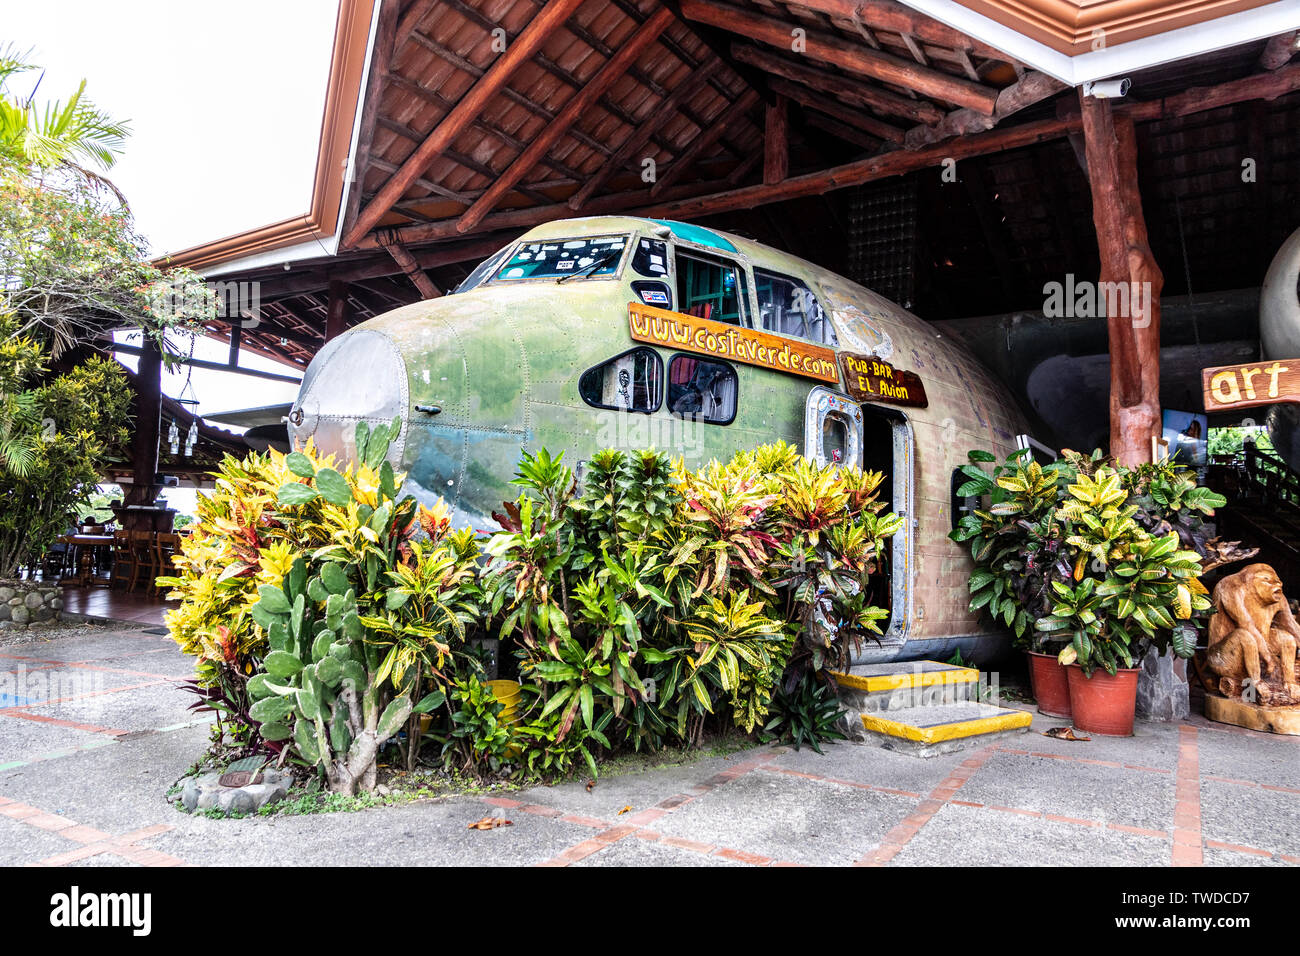 El Avión, in Manuel Antonio, is a popular bar and restaurant in Costa Rica. The centerpiece of the restaurant is a hollowed out C-123 cargo plane. Stock Photo